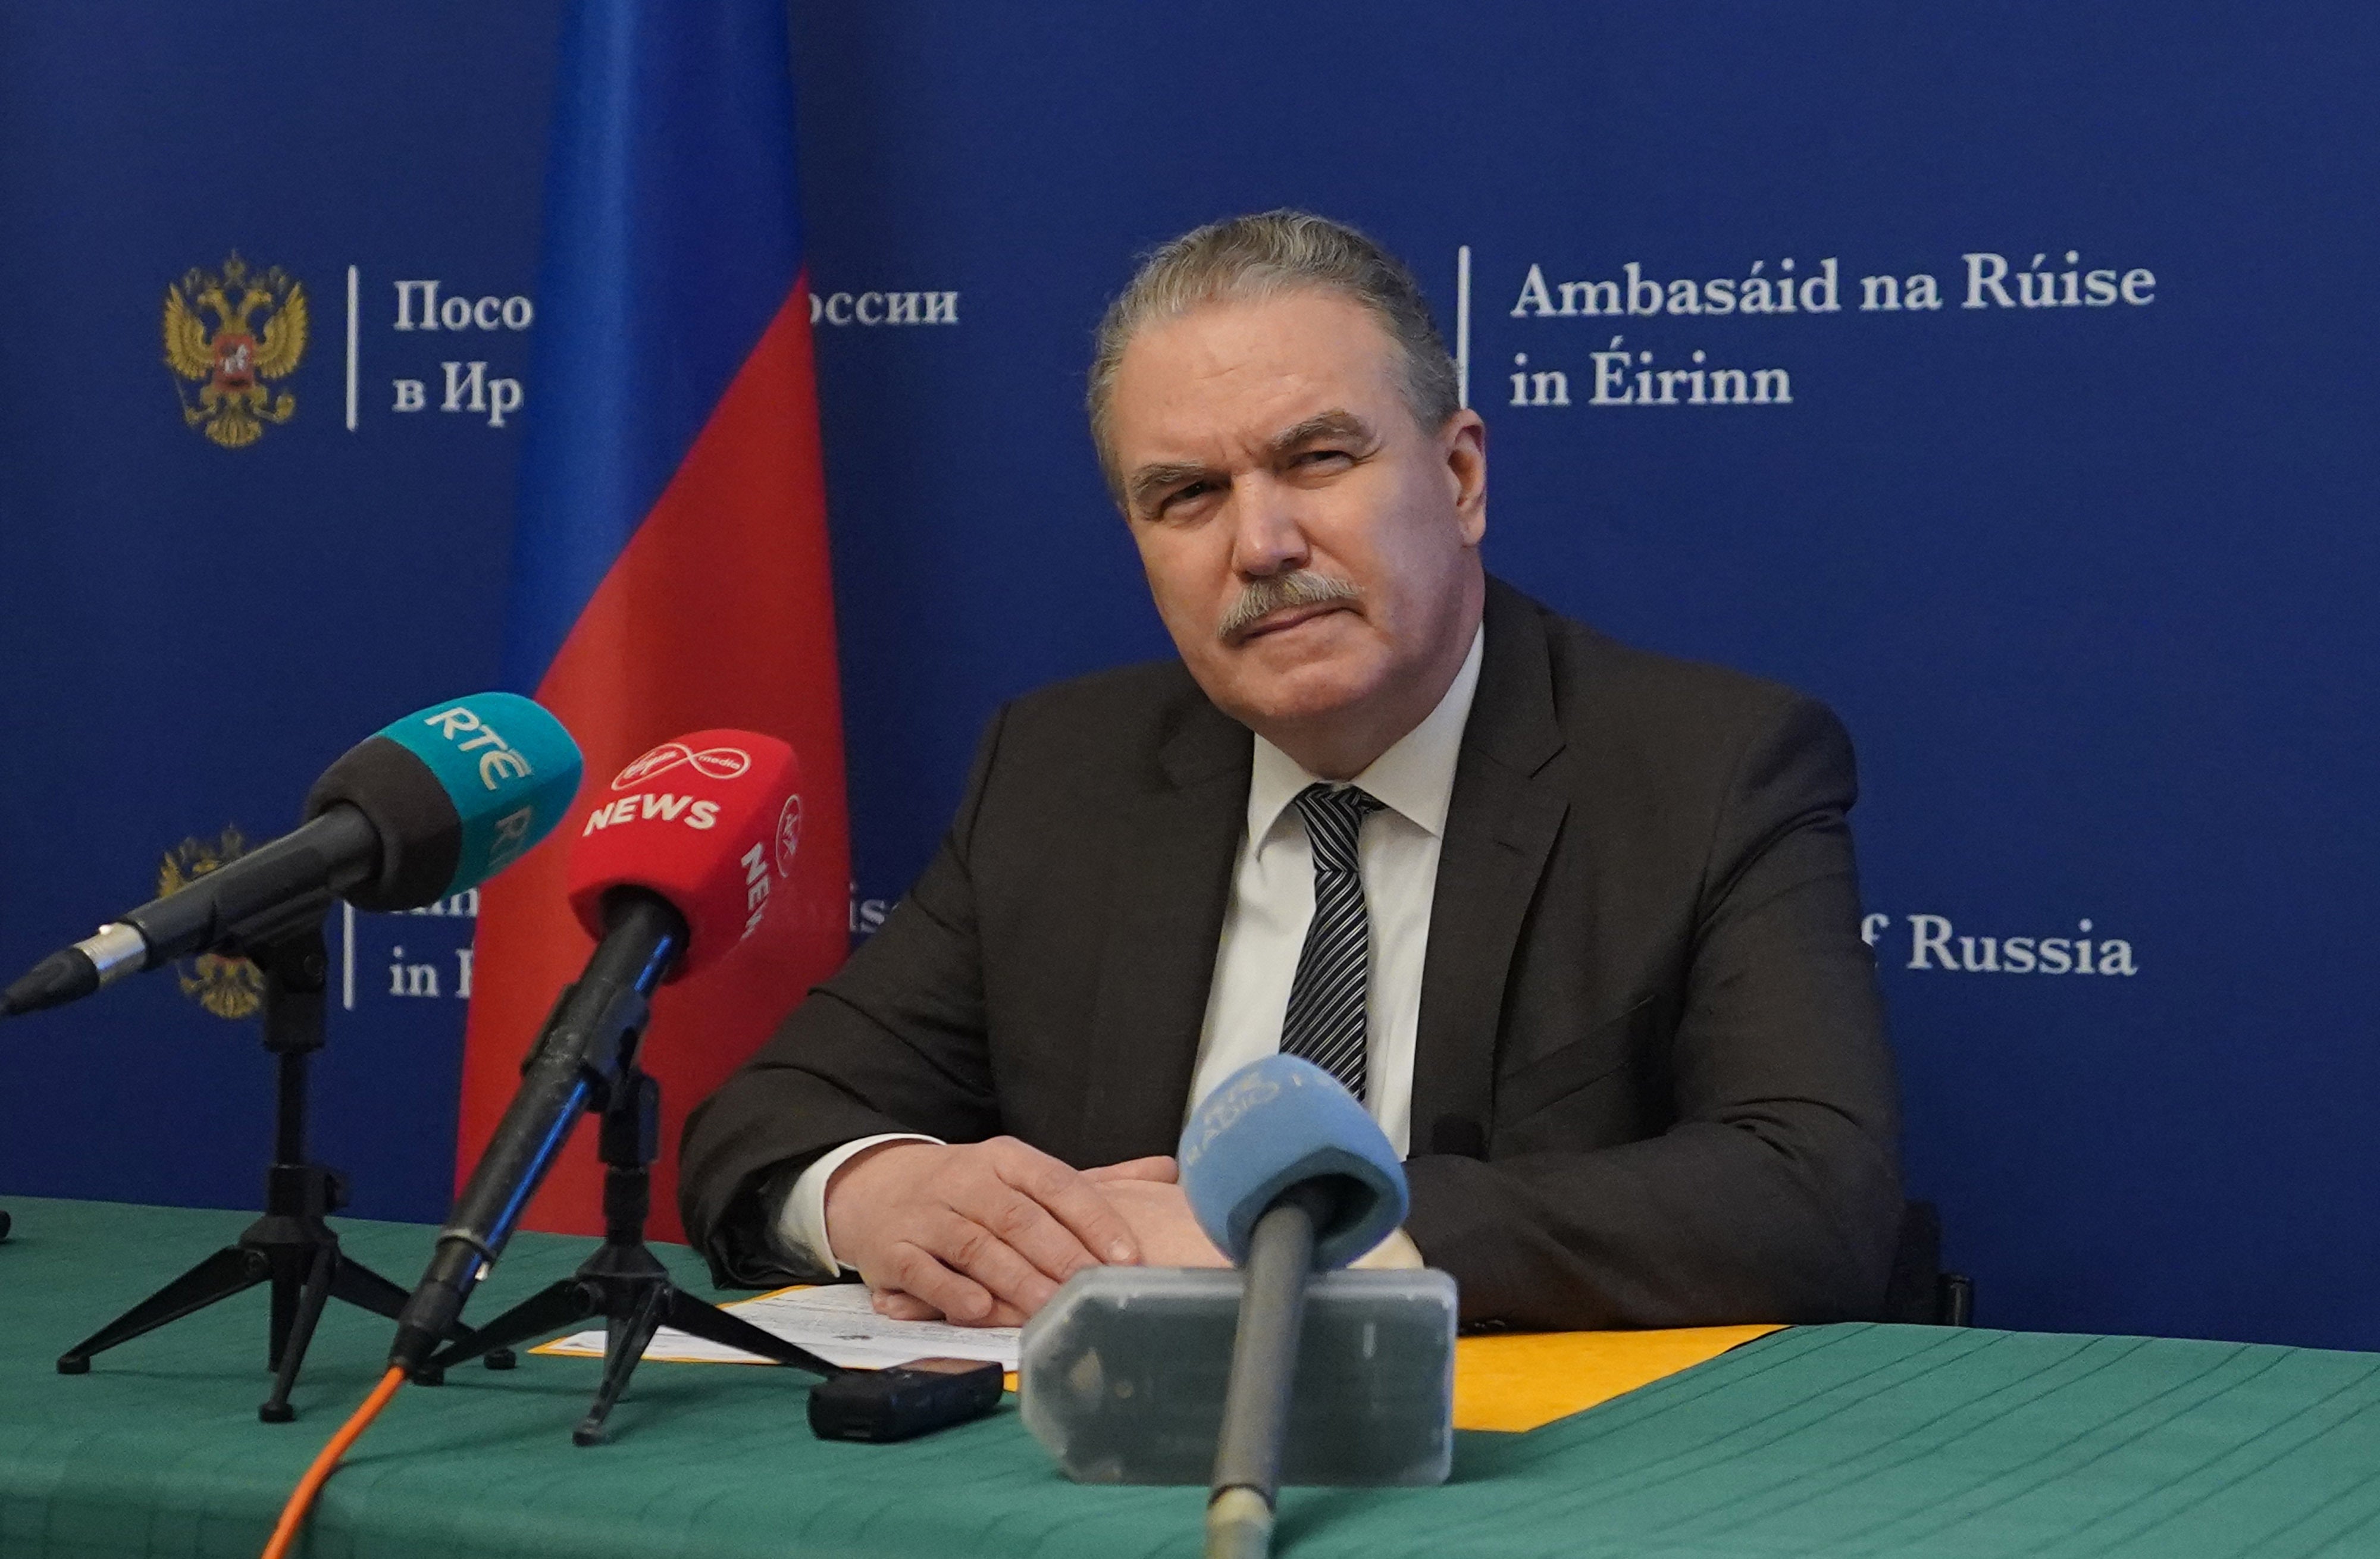 Russian ambassador to Ireland Yury Filatov speaking at a press conference at the Russian Embassy in Dublin in January (PA)